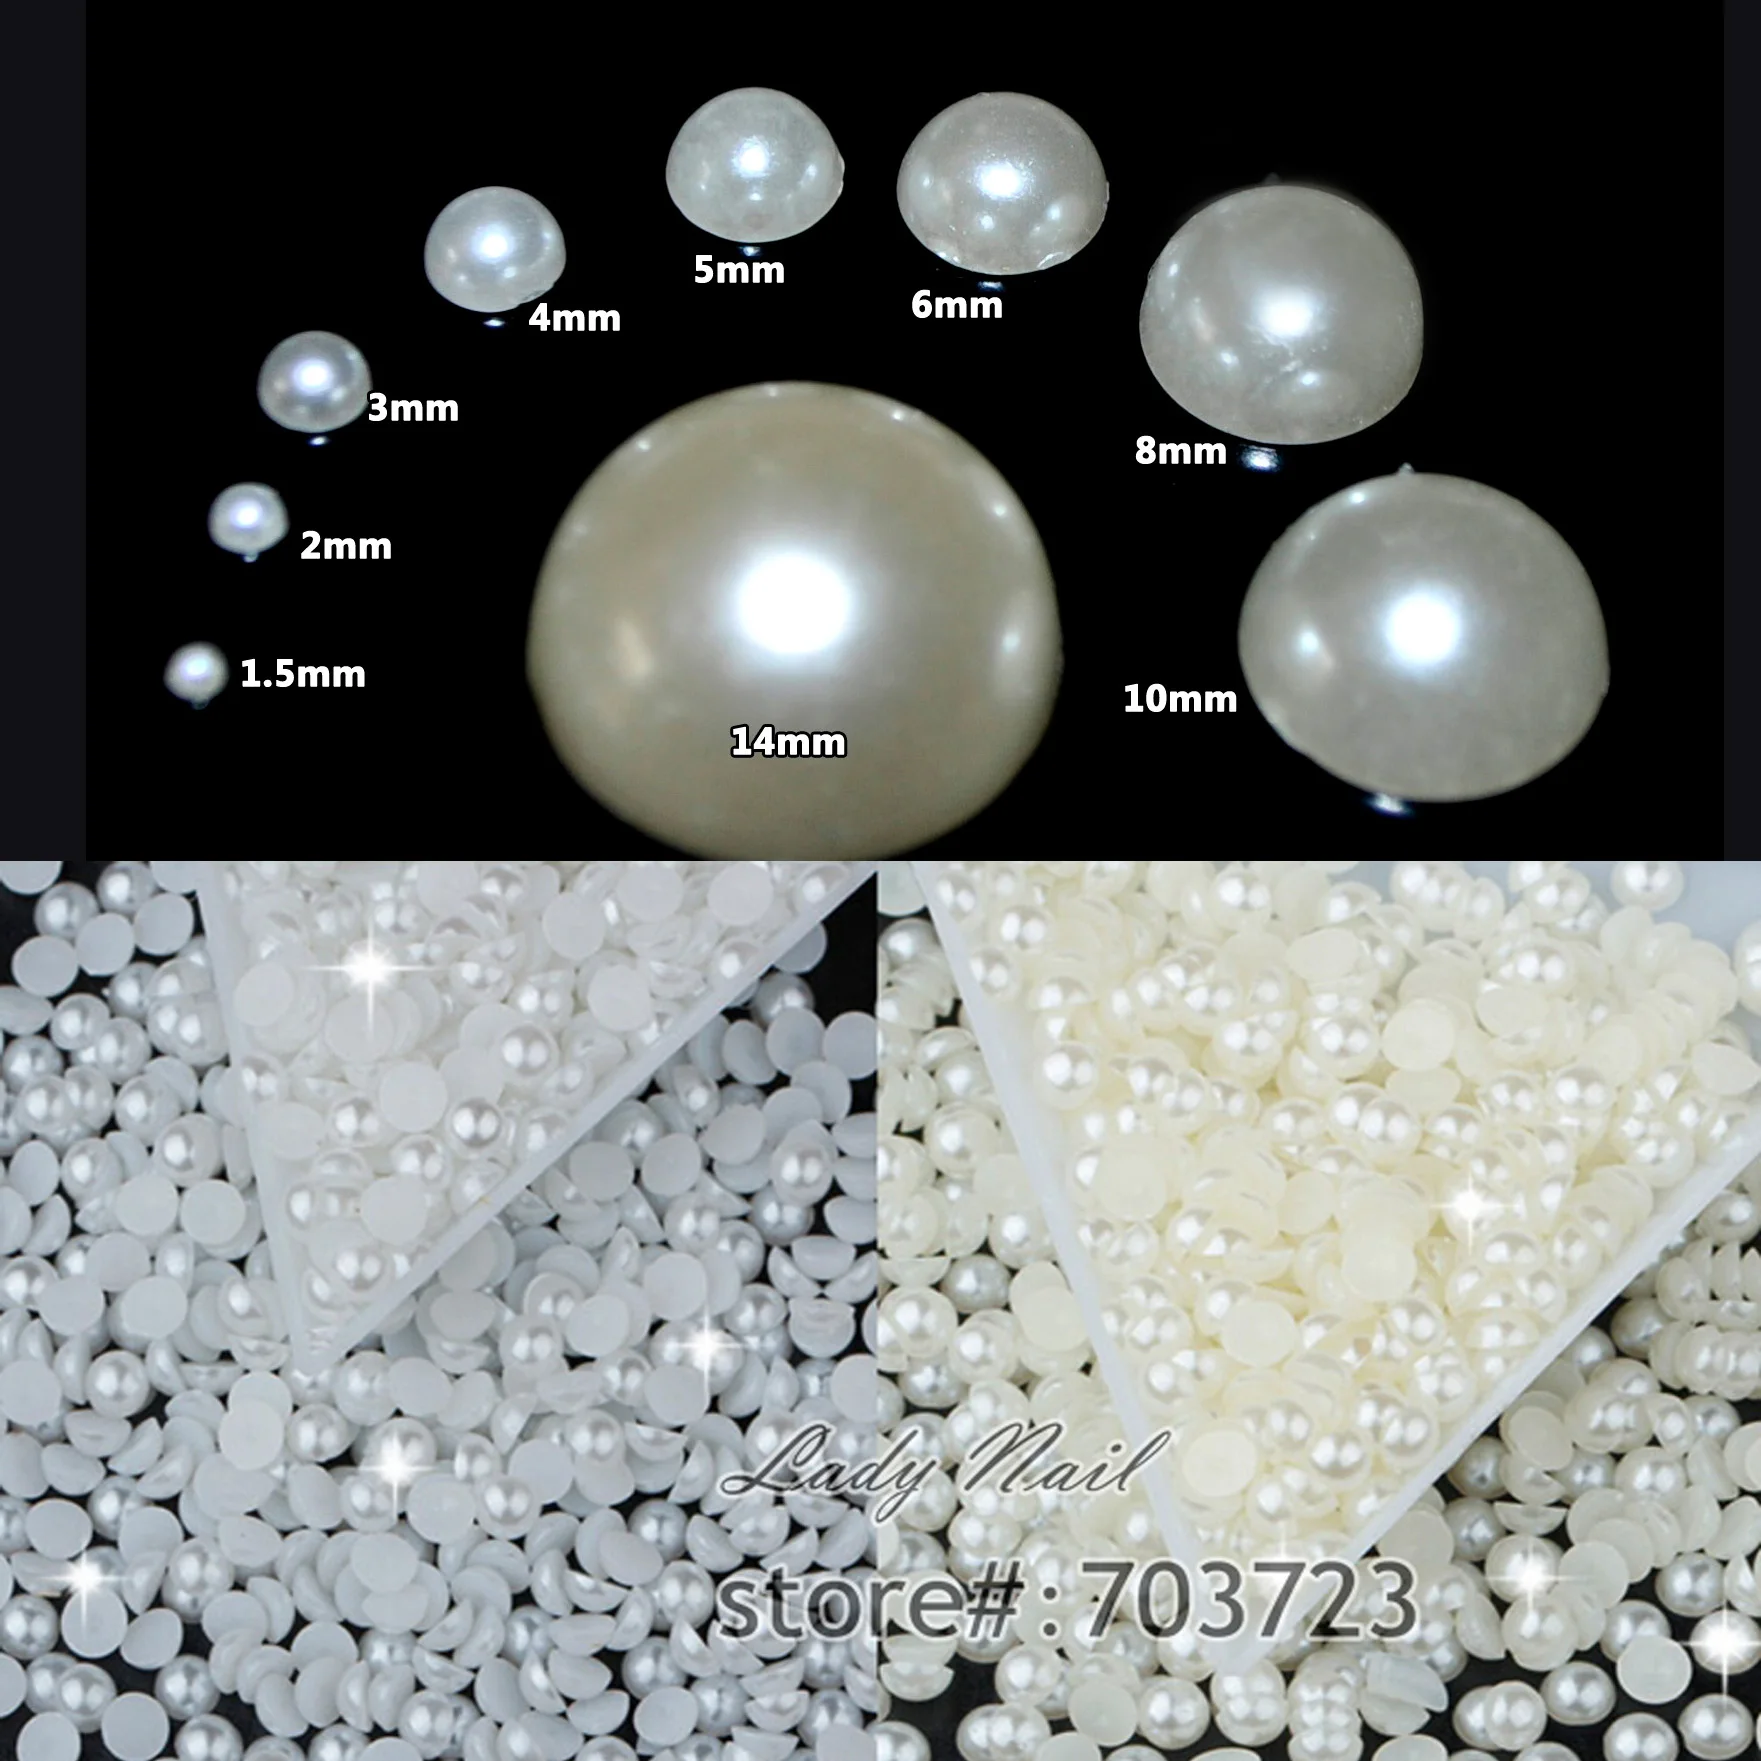 White Half Round Flat back Pearls mix sizes 4mm 5mm 6mm 8mm 10mm to 25mm  all sizes for nail art Phone Decoration